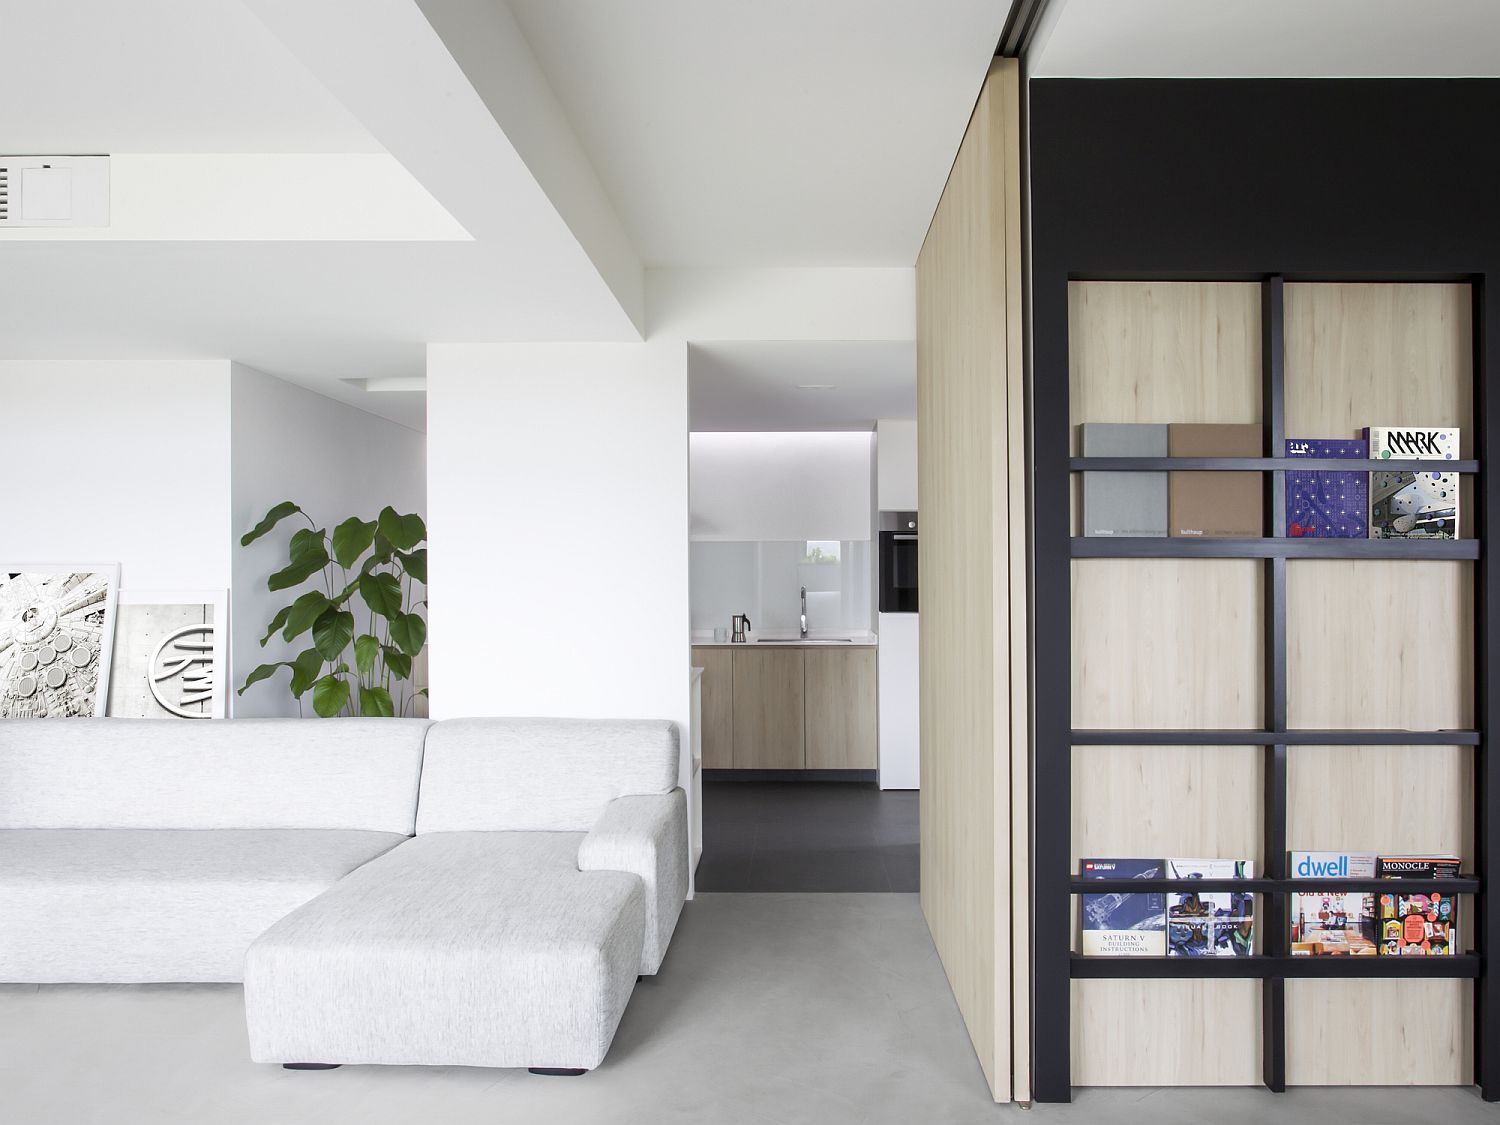 Smart-wooden-partitions-create-rooms-within-a-larger-room